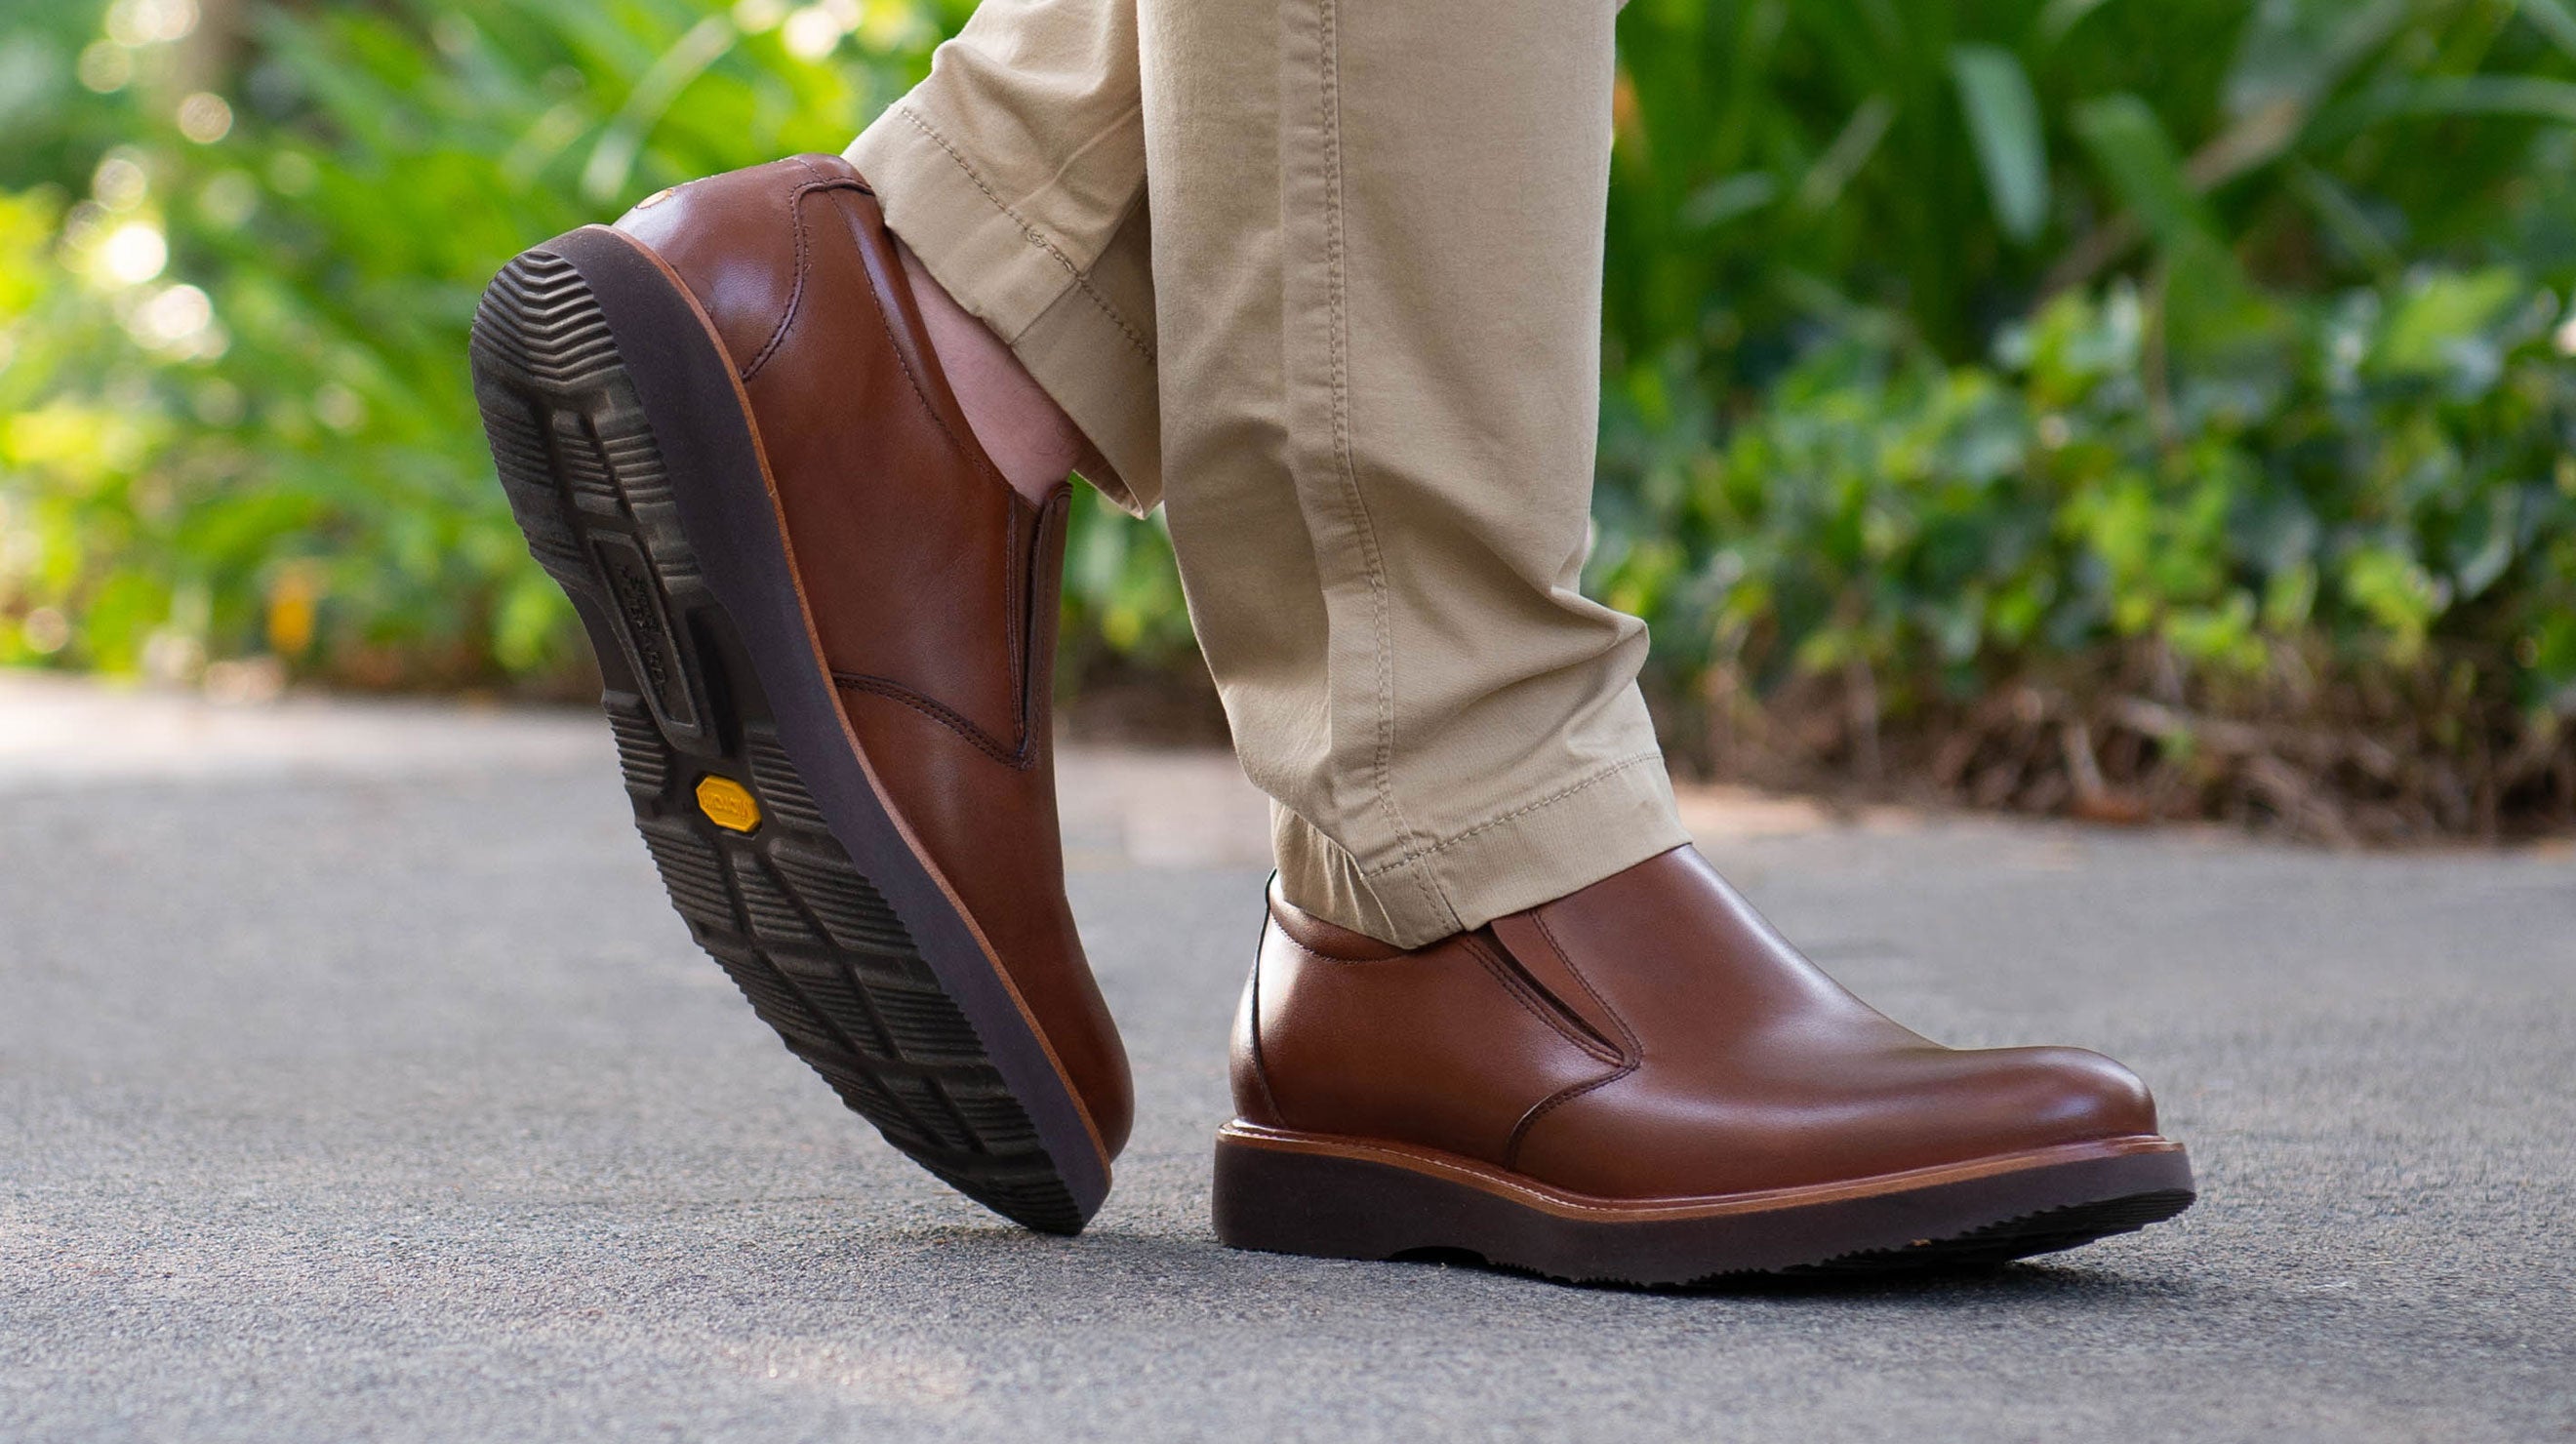 The Best Travel Shoes For Walking